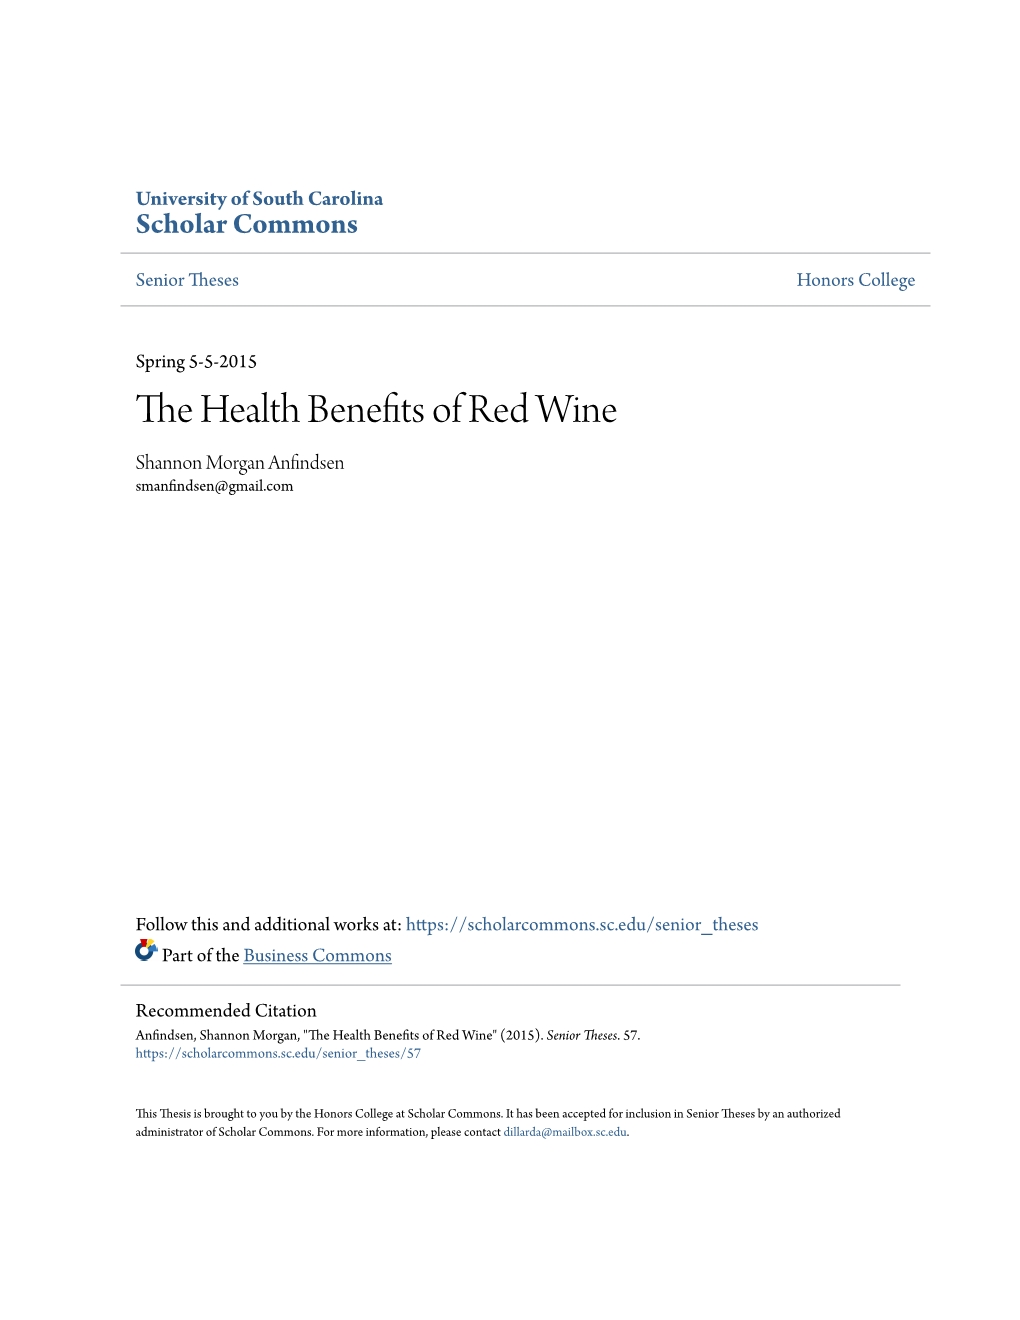 The Health Benefits of Red Wine When I Studied Abroad in Bilbao, Spain